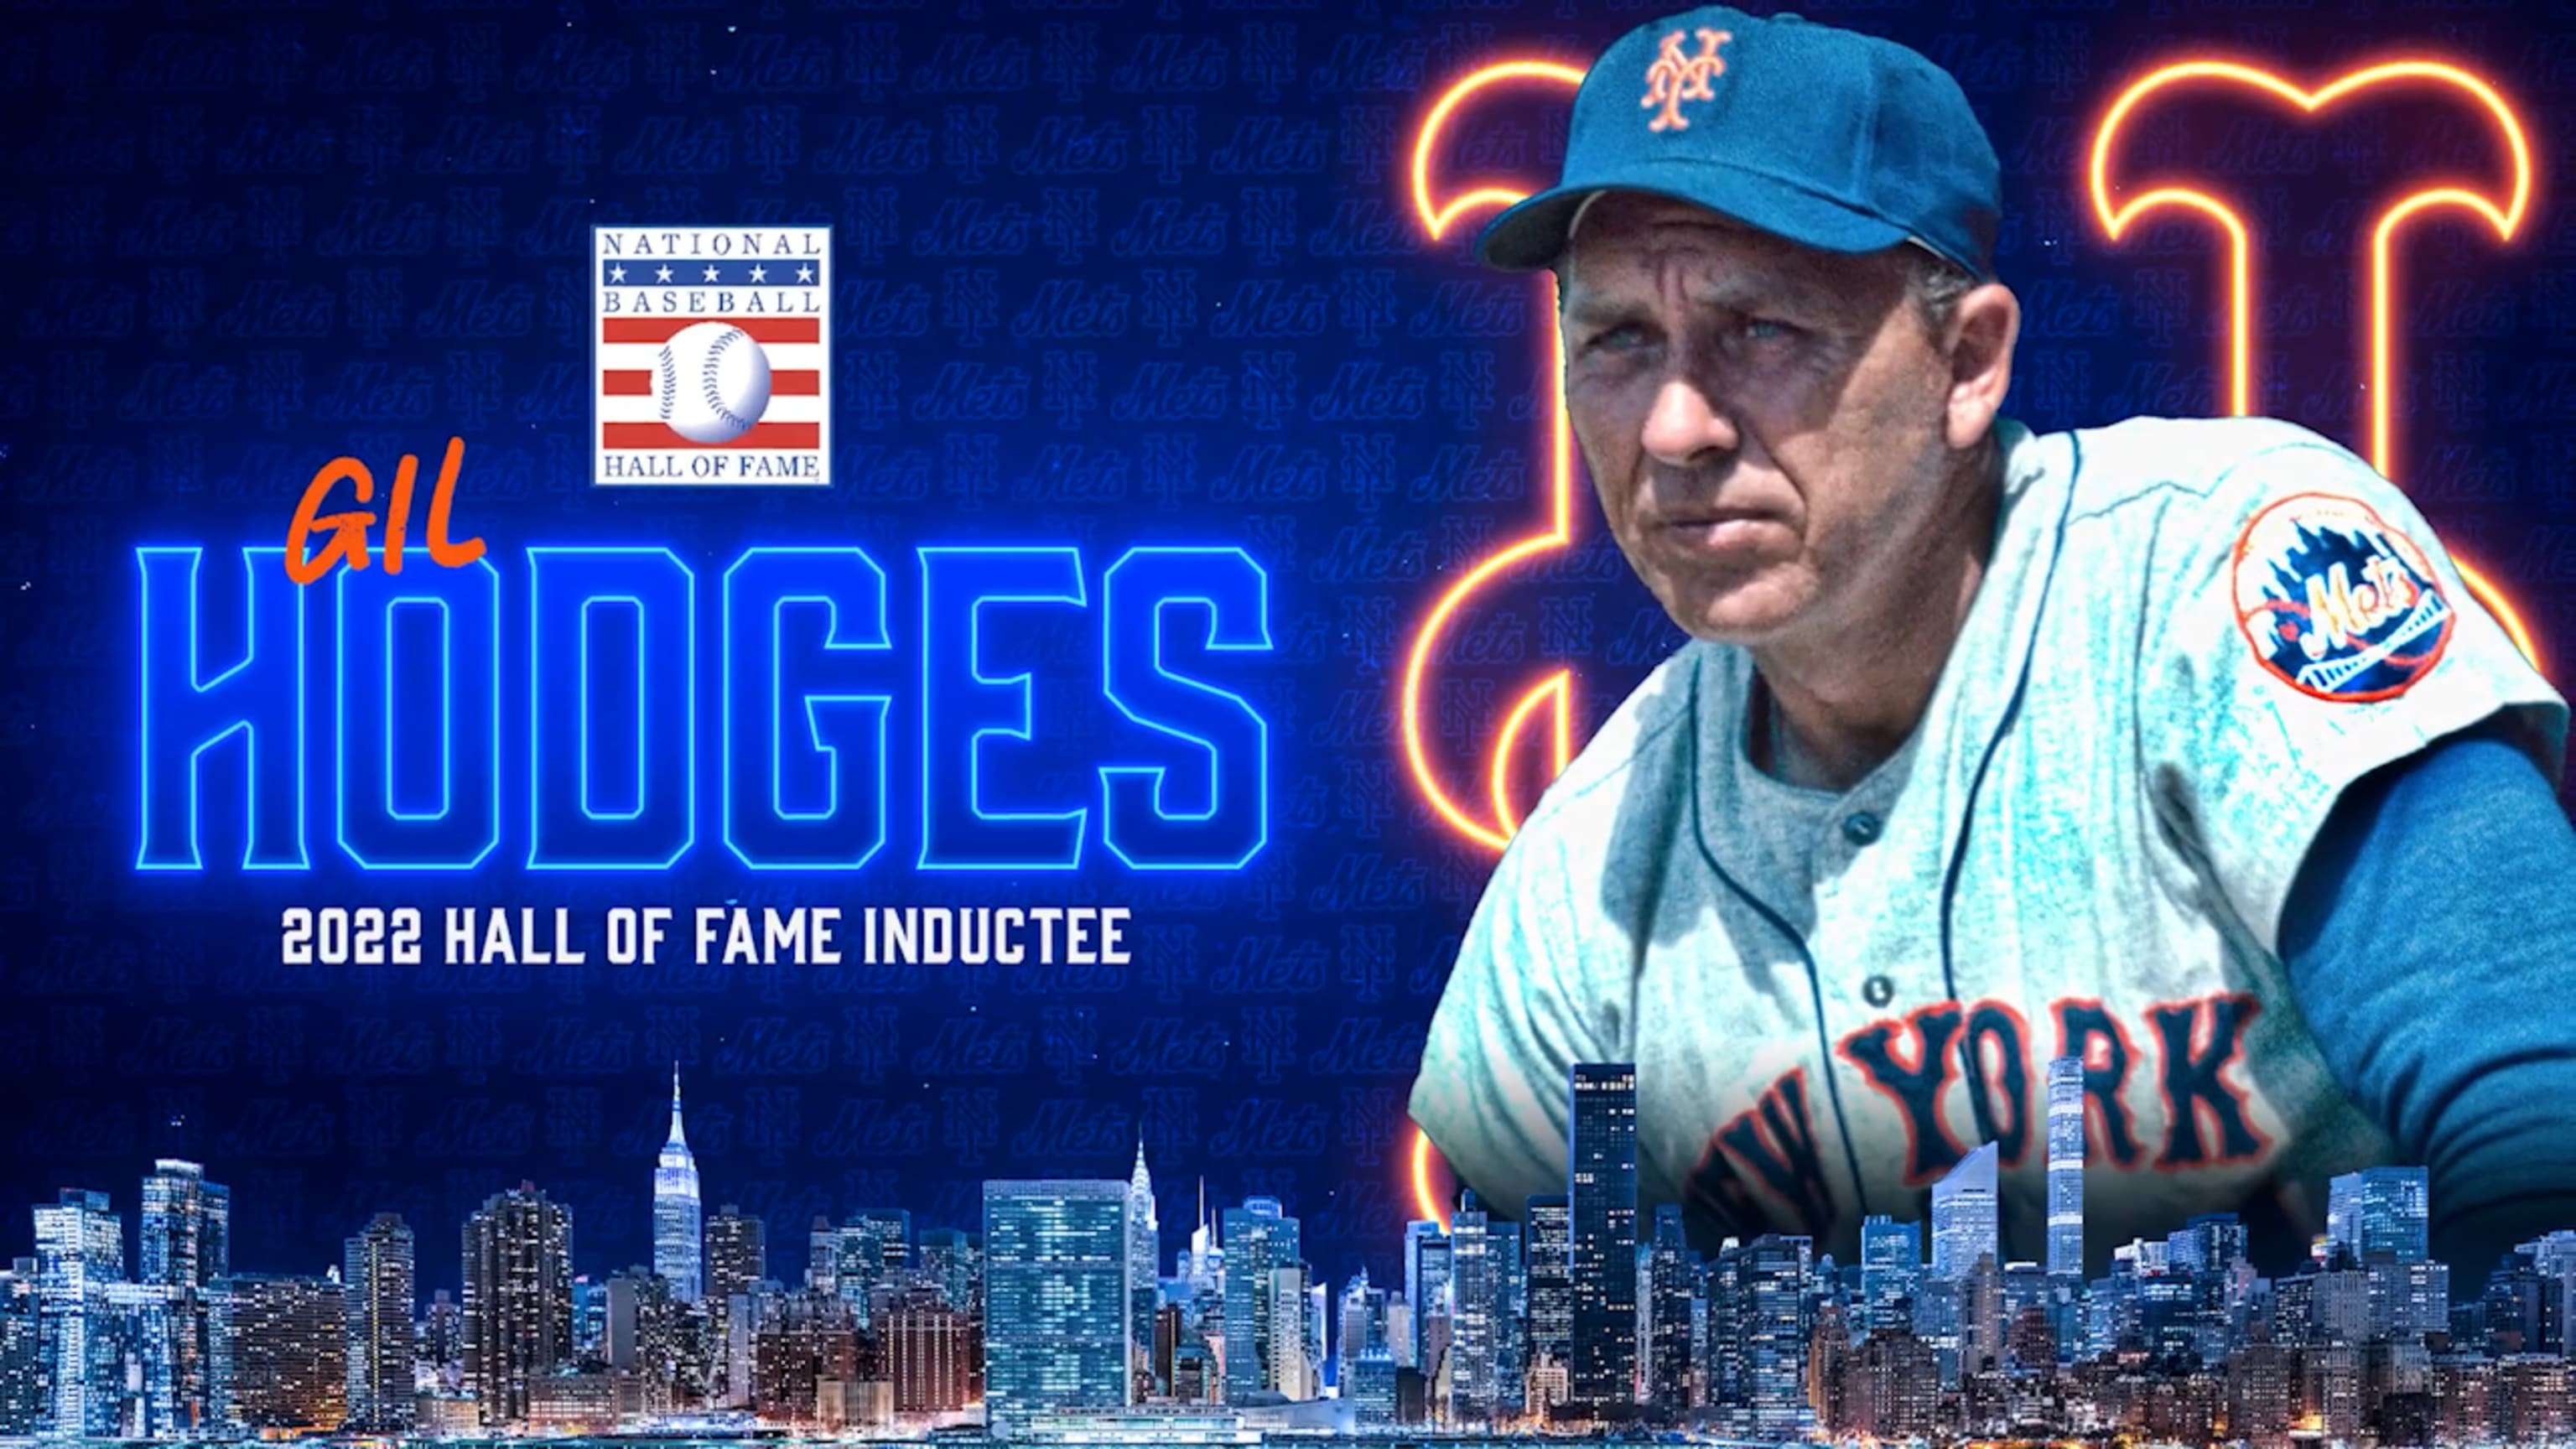 Gil Hodges remembered 50 years after death